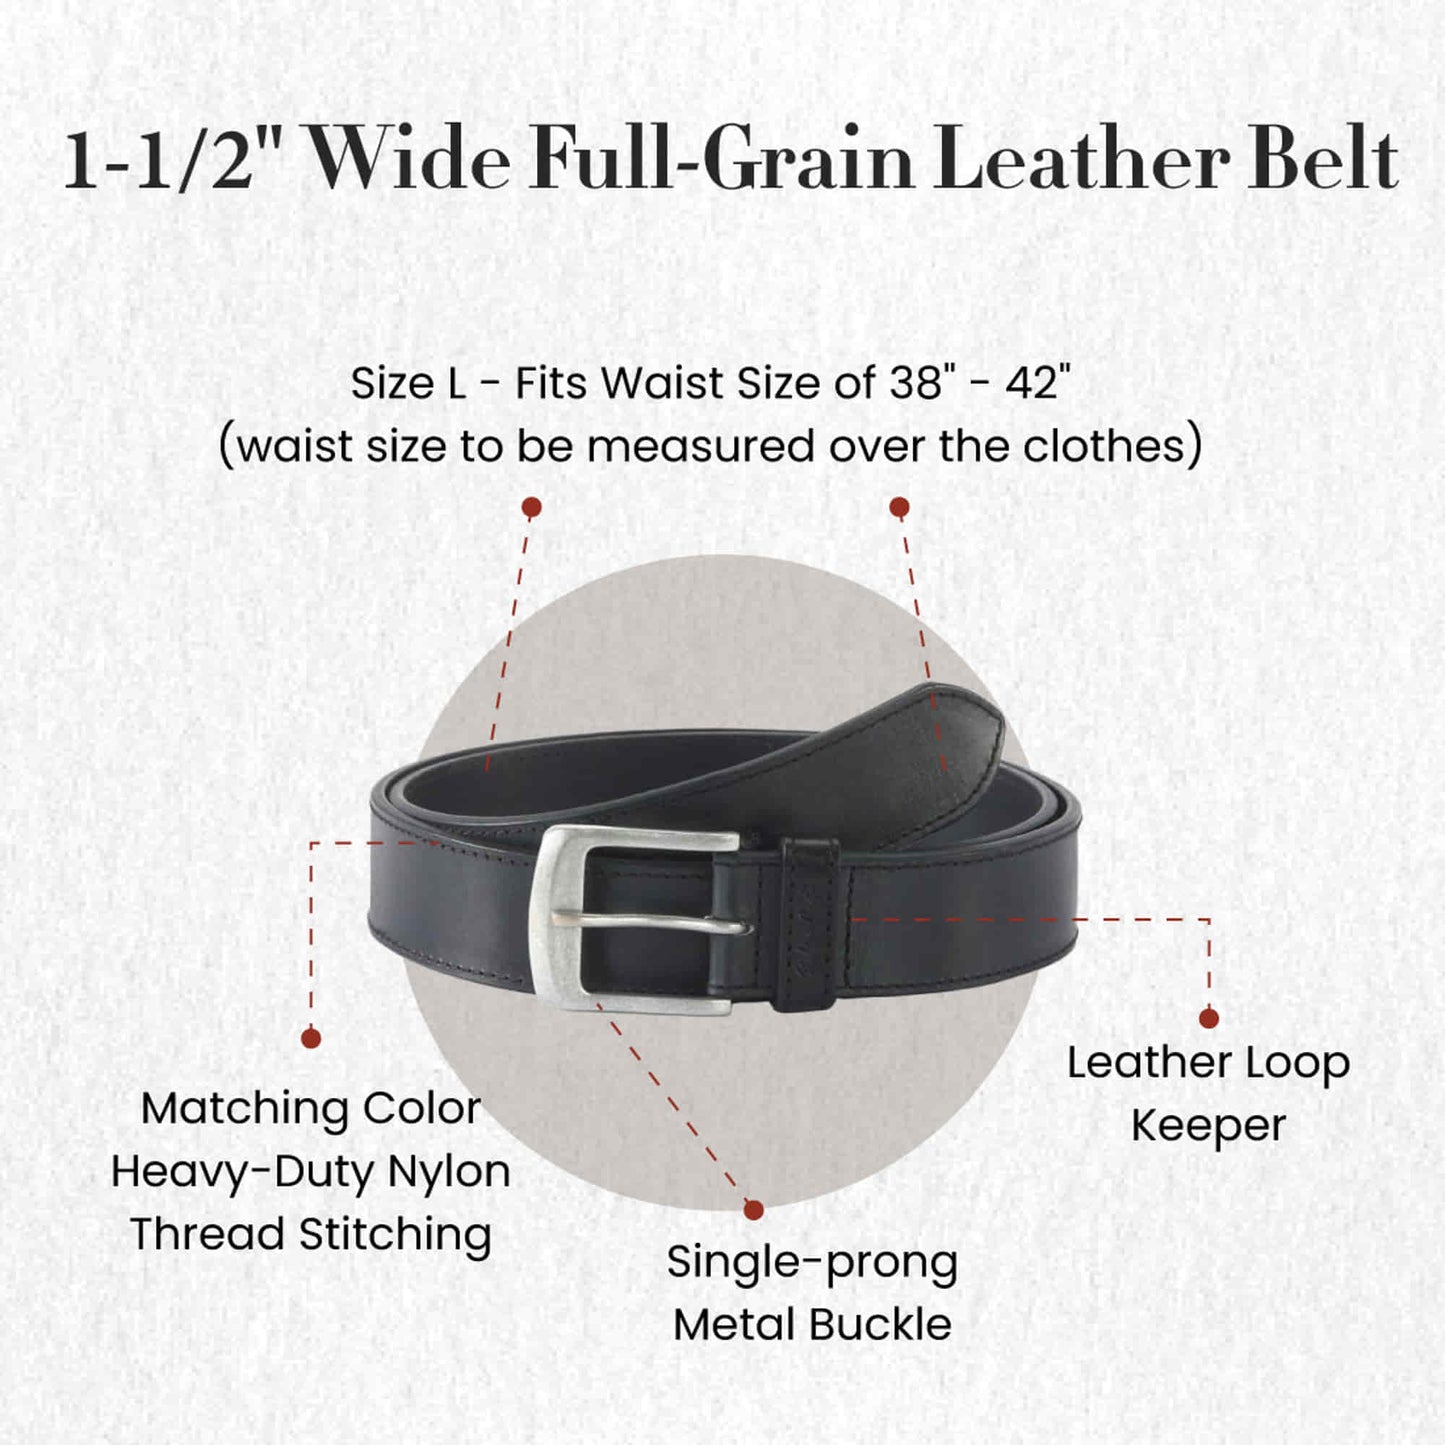 392701-L - one and a half inch wide large size leather belt in black color full grain leather - front view showing the details